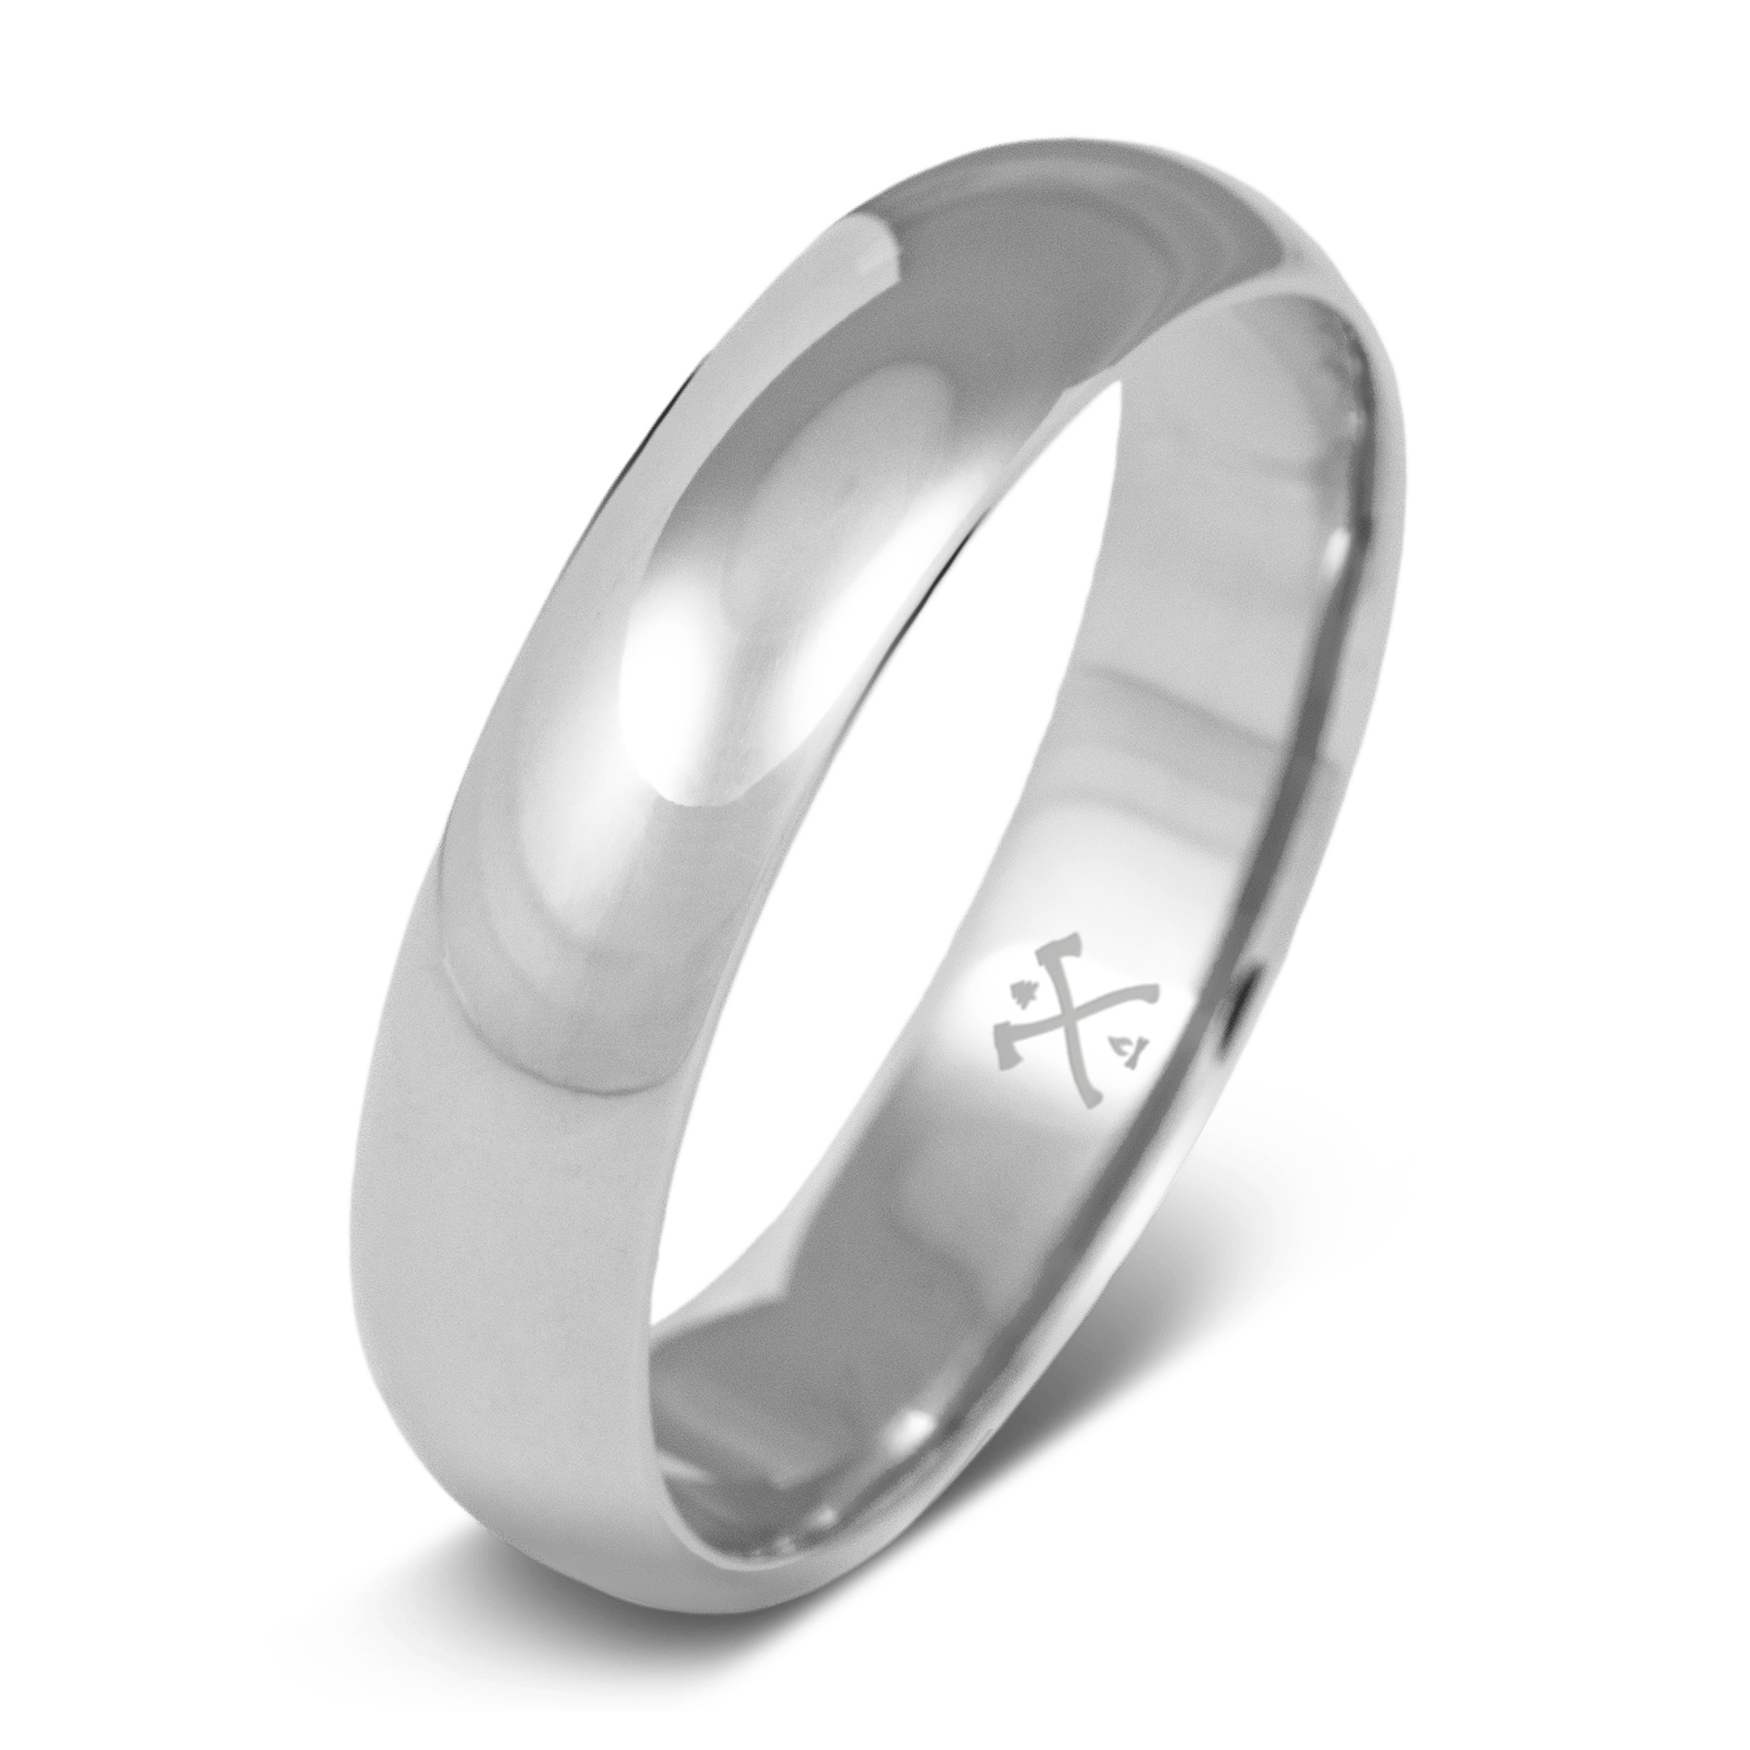 The Knight - Men's Wedding Rings - Manly Bands